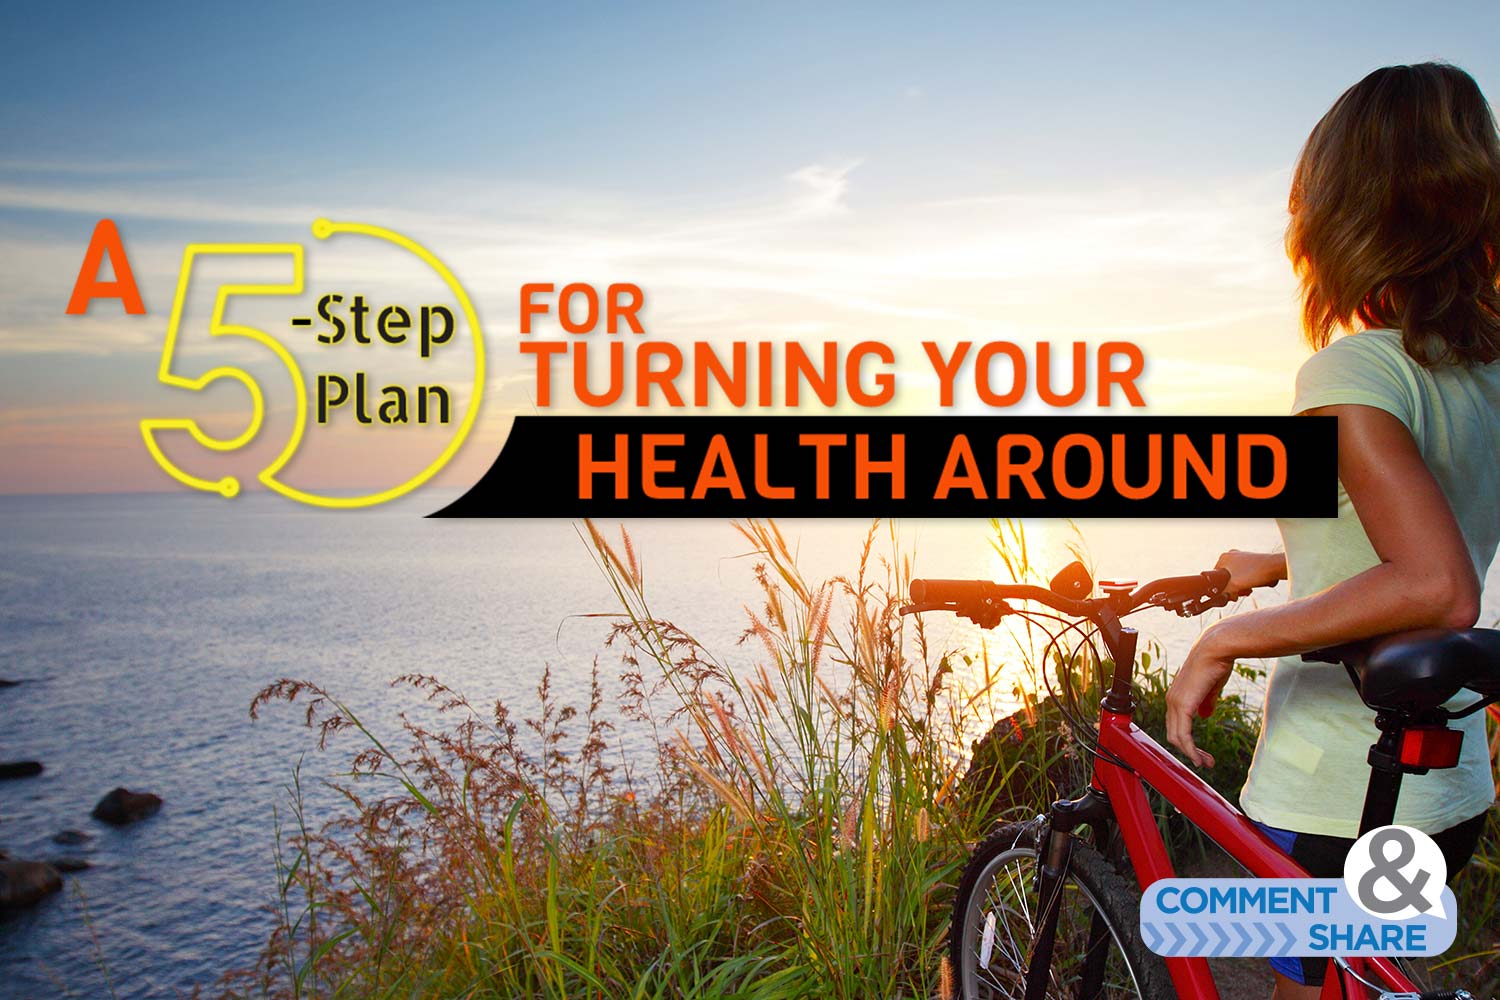 A 5-Step Plan for Turning Your Health Around